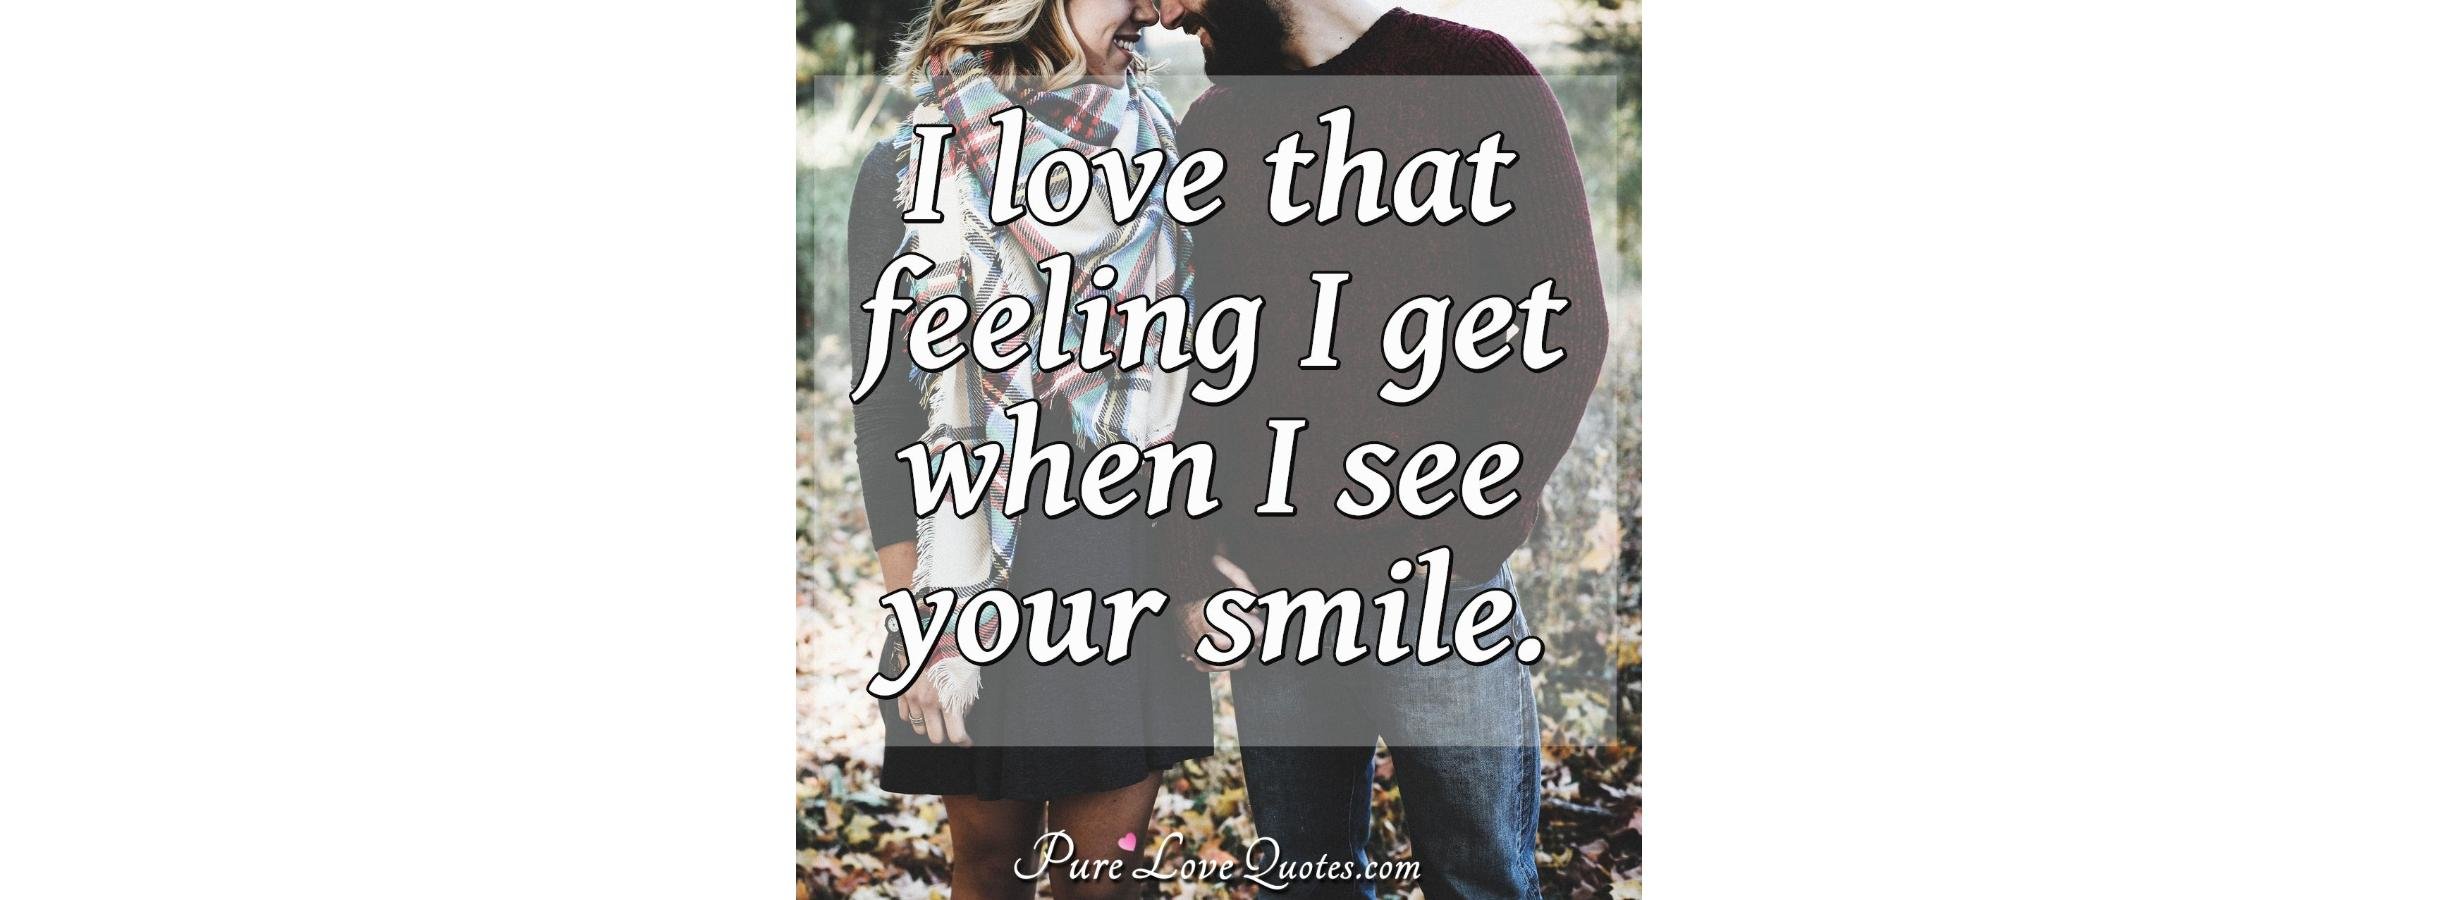 I love that feeling I get when I see your smile ...